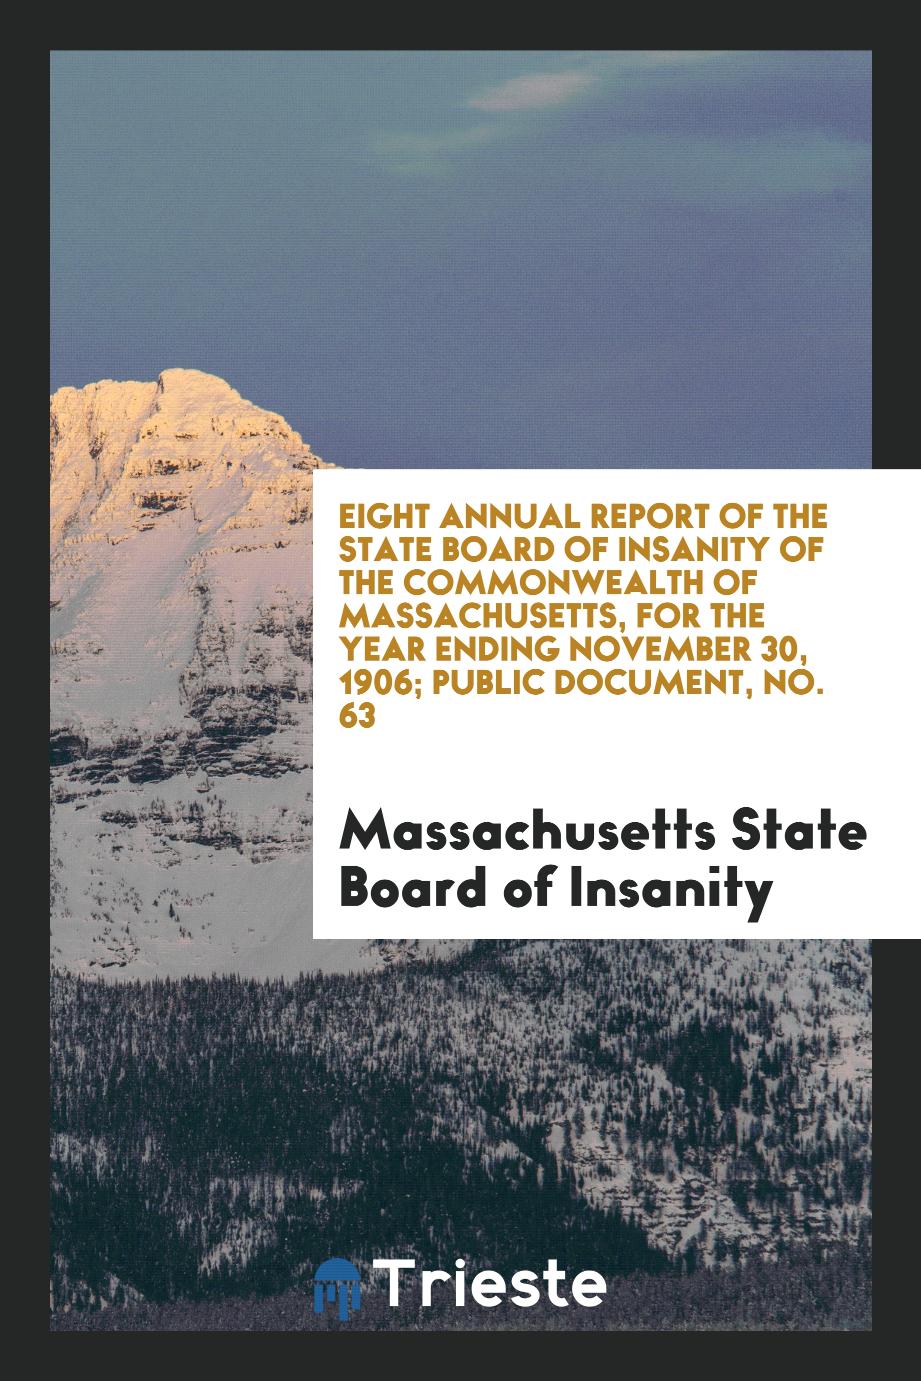 Eight Annual Report of the State Board of Insanity of the Commonwealth of Massachusetts, for the Year Ending November 30, 1906; Public Document, No. 63